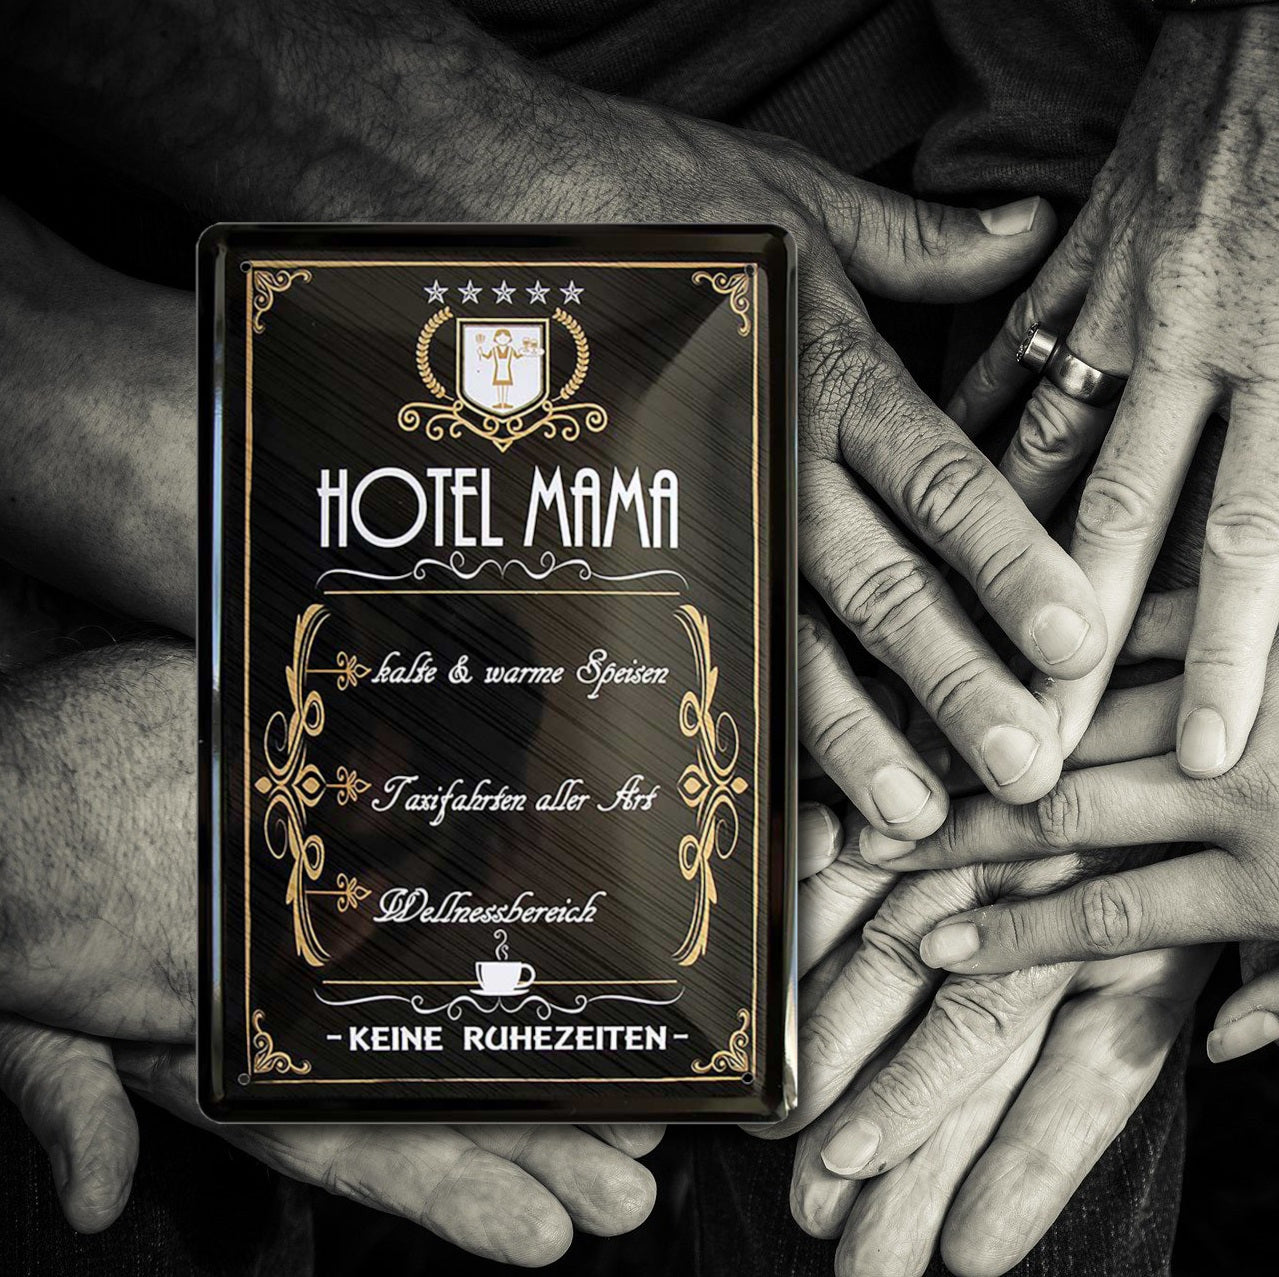 Tin sign "Hotel Mama cold and warm dishes, taxi rides of all kinds" 20x30cm